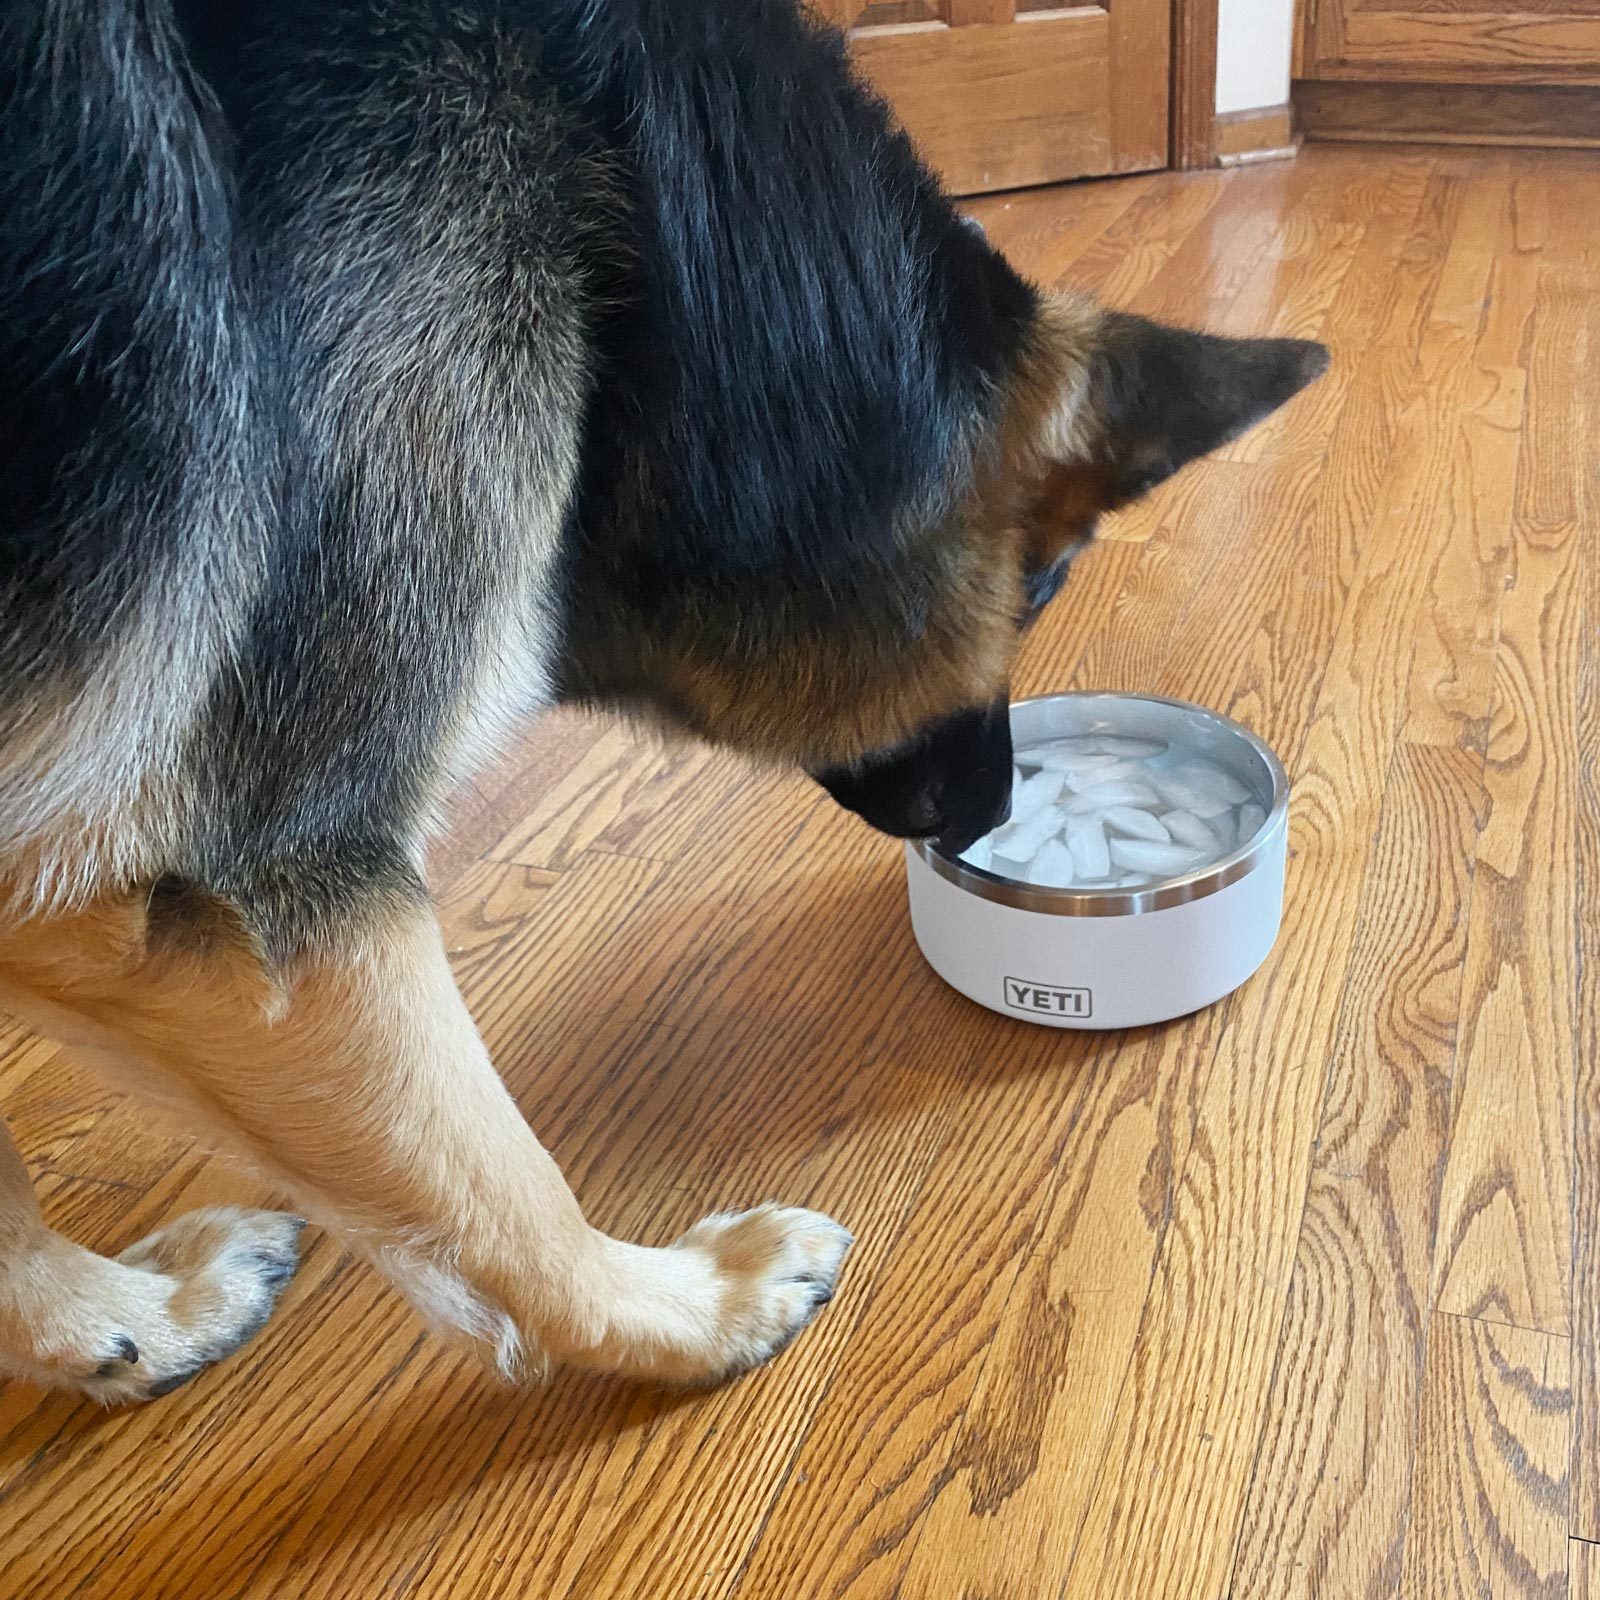 German shepherd drinking from a Yeti Dog Bowl that is filled with water and ice